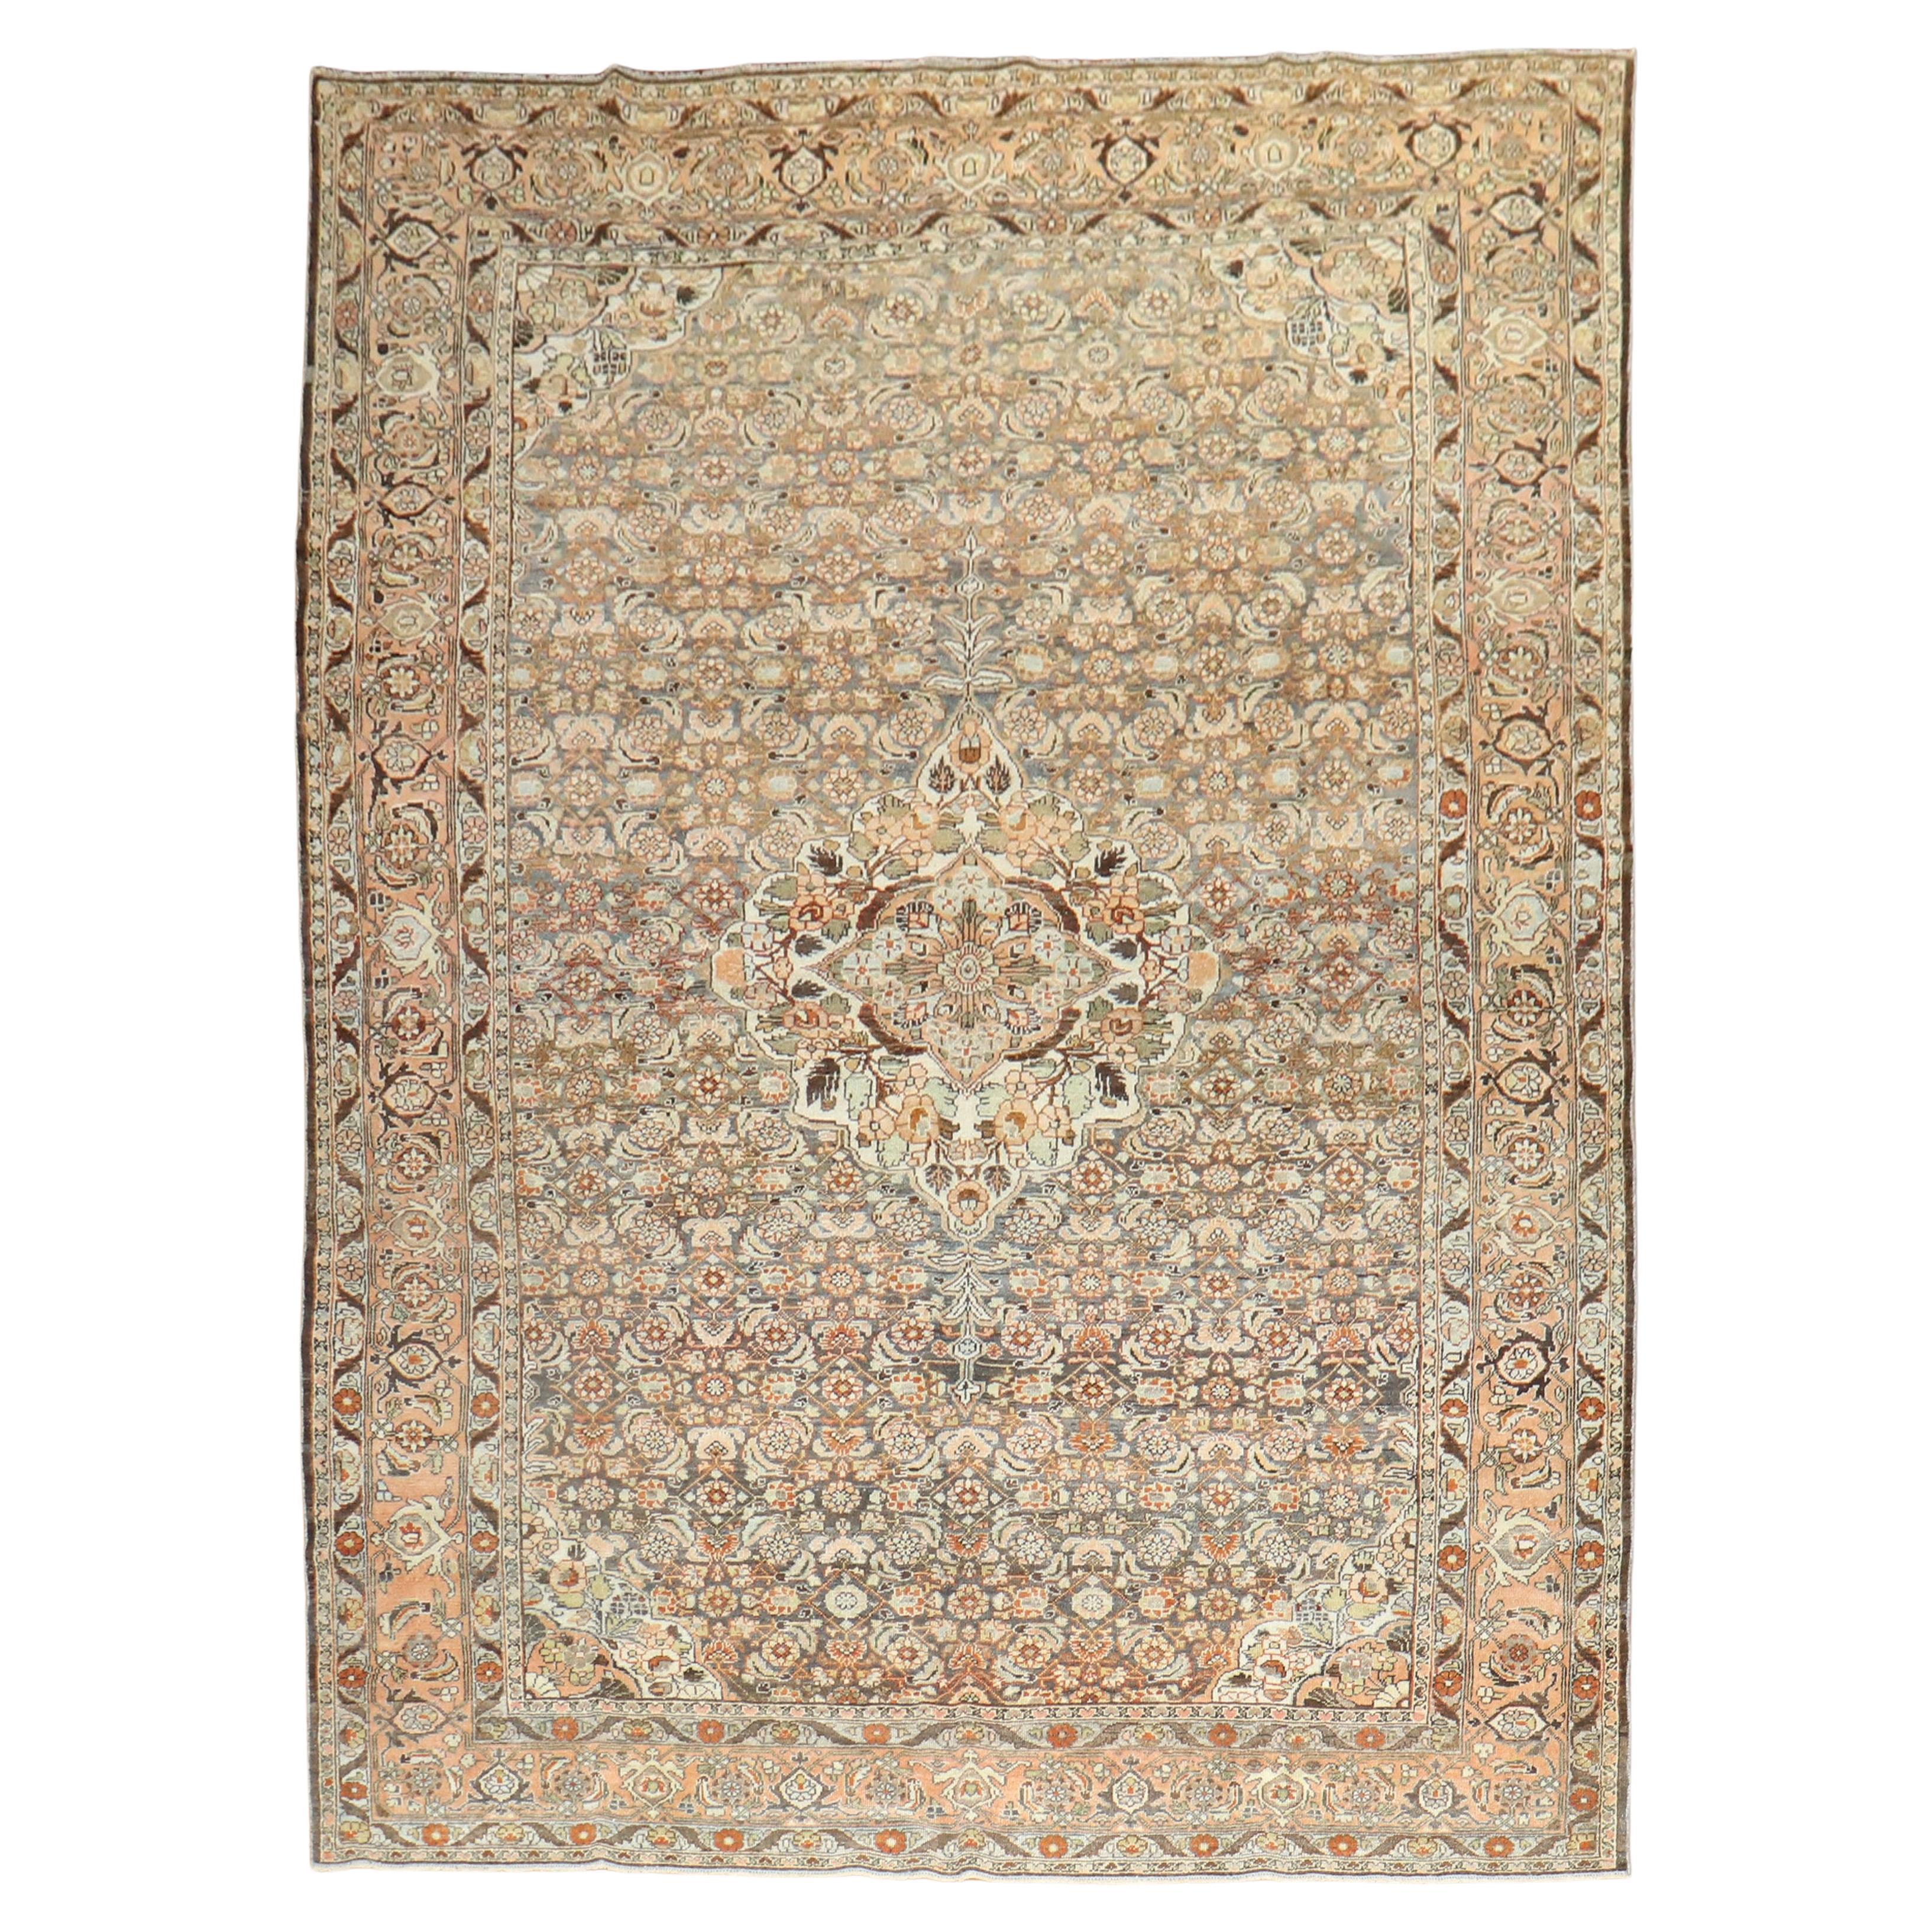 Antique Persian Malayer Room Size Rug